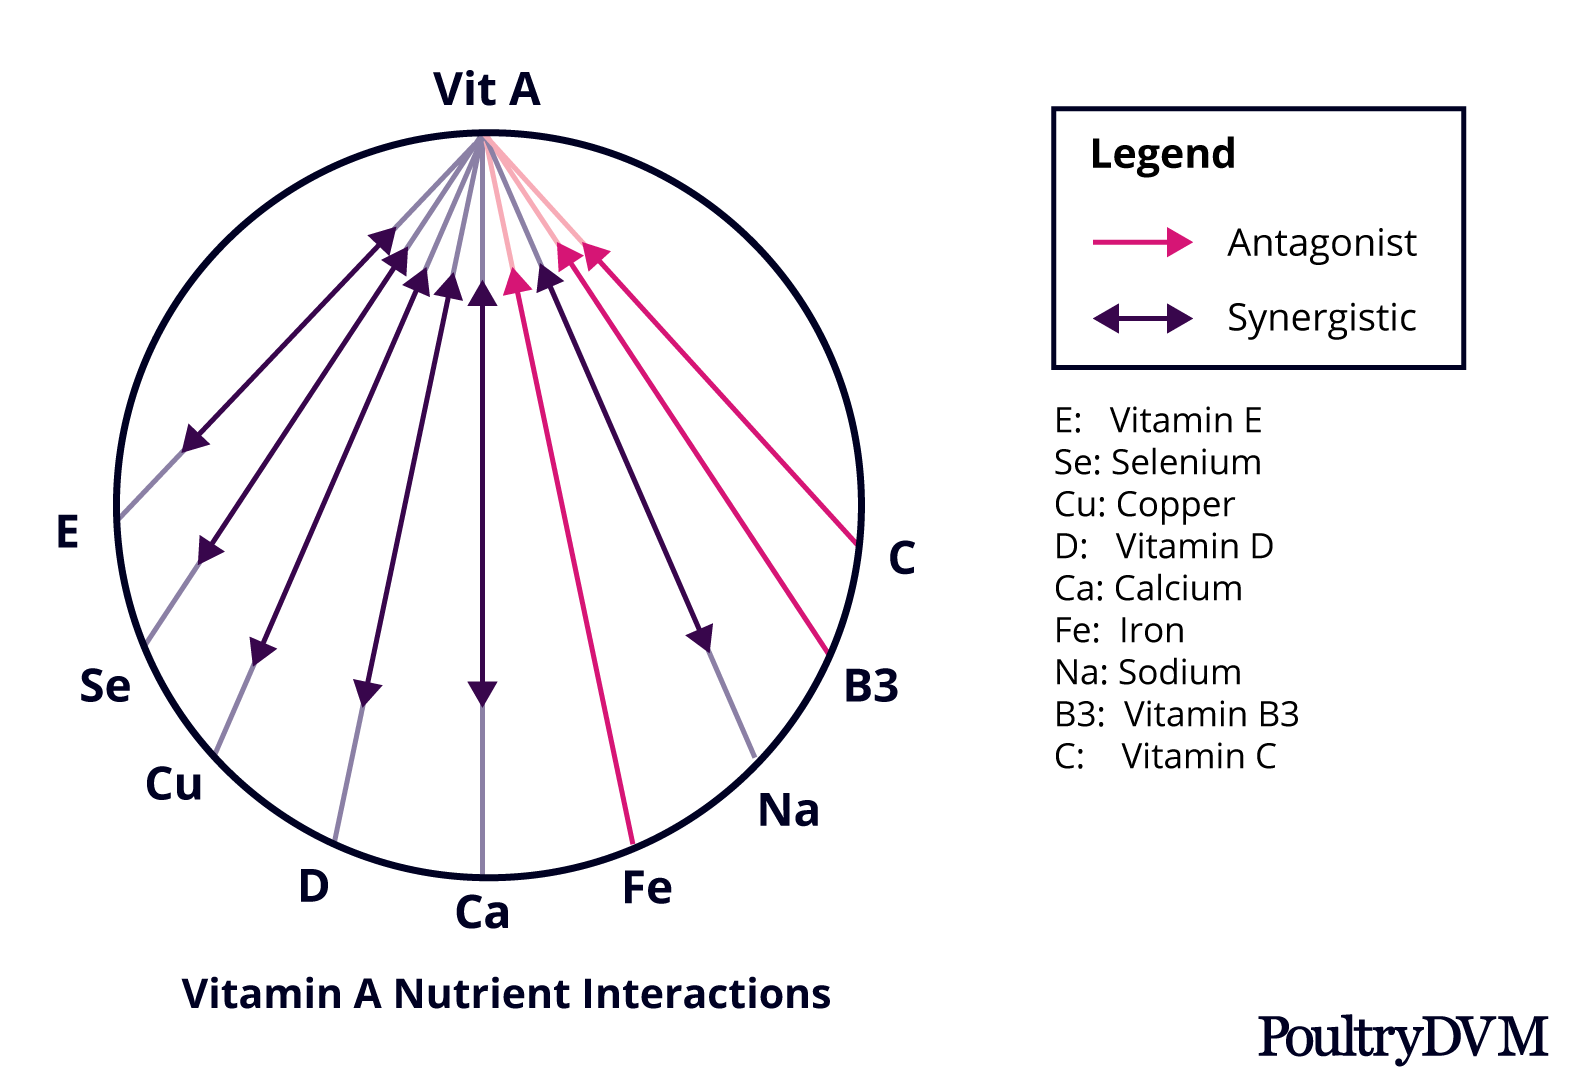 Vitamin A nutrient interactions